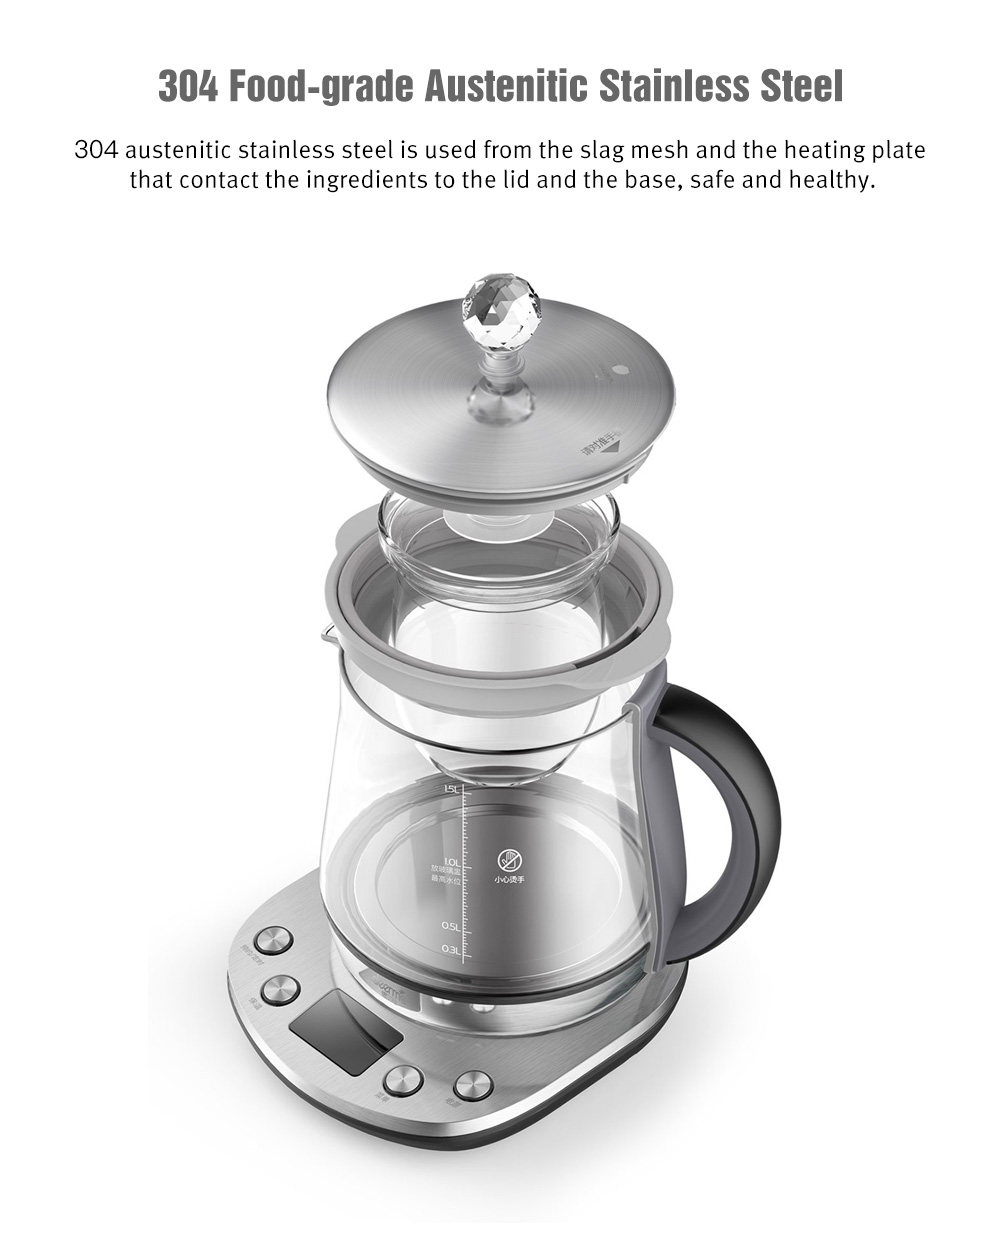 Deerma DEM - YS802 Multifunction Stainless Steel Electric Health Pot Kettle from Xiaomi Youpin